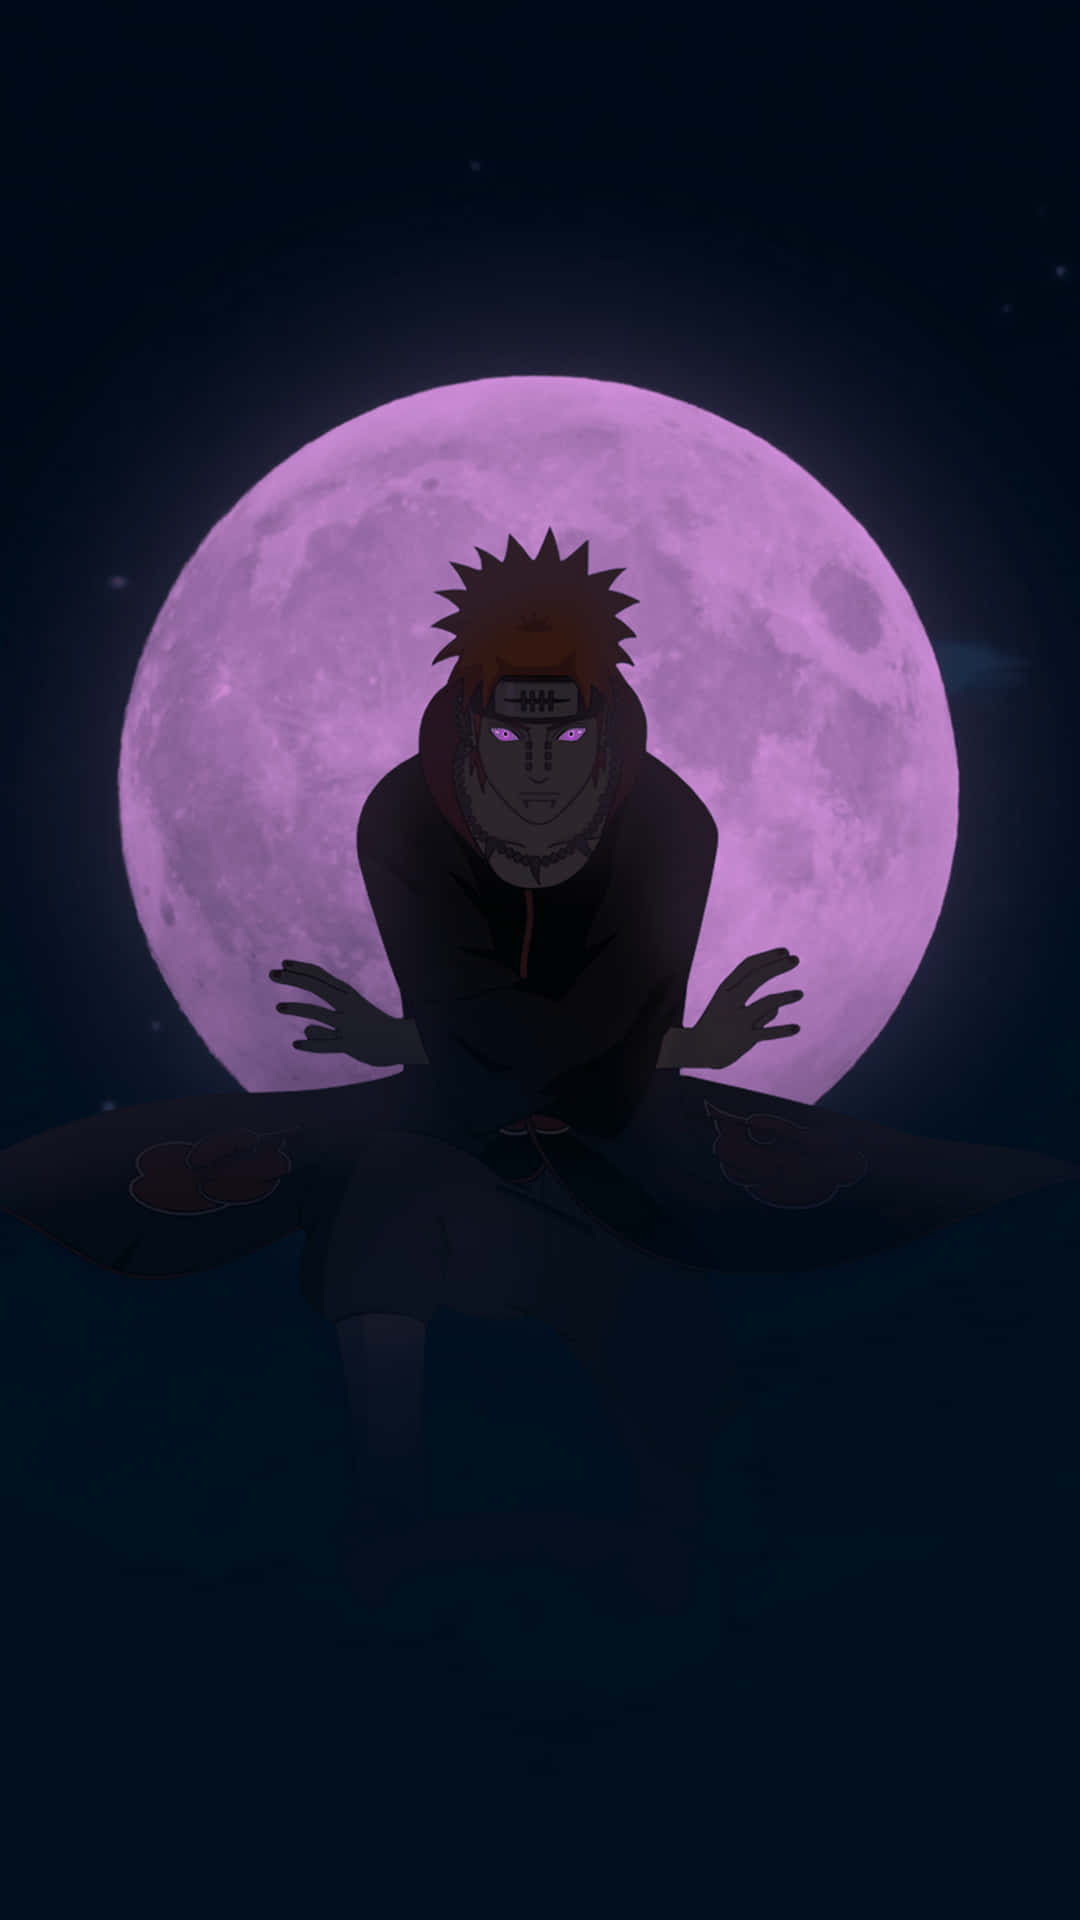 Naruto Uzuamki And Pain In A Battle Of Wills.